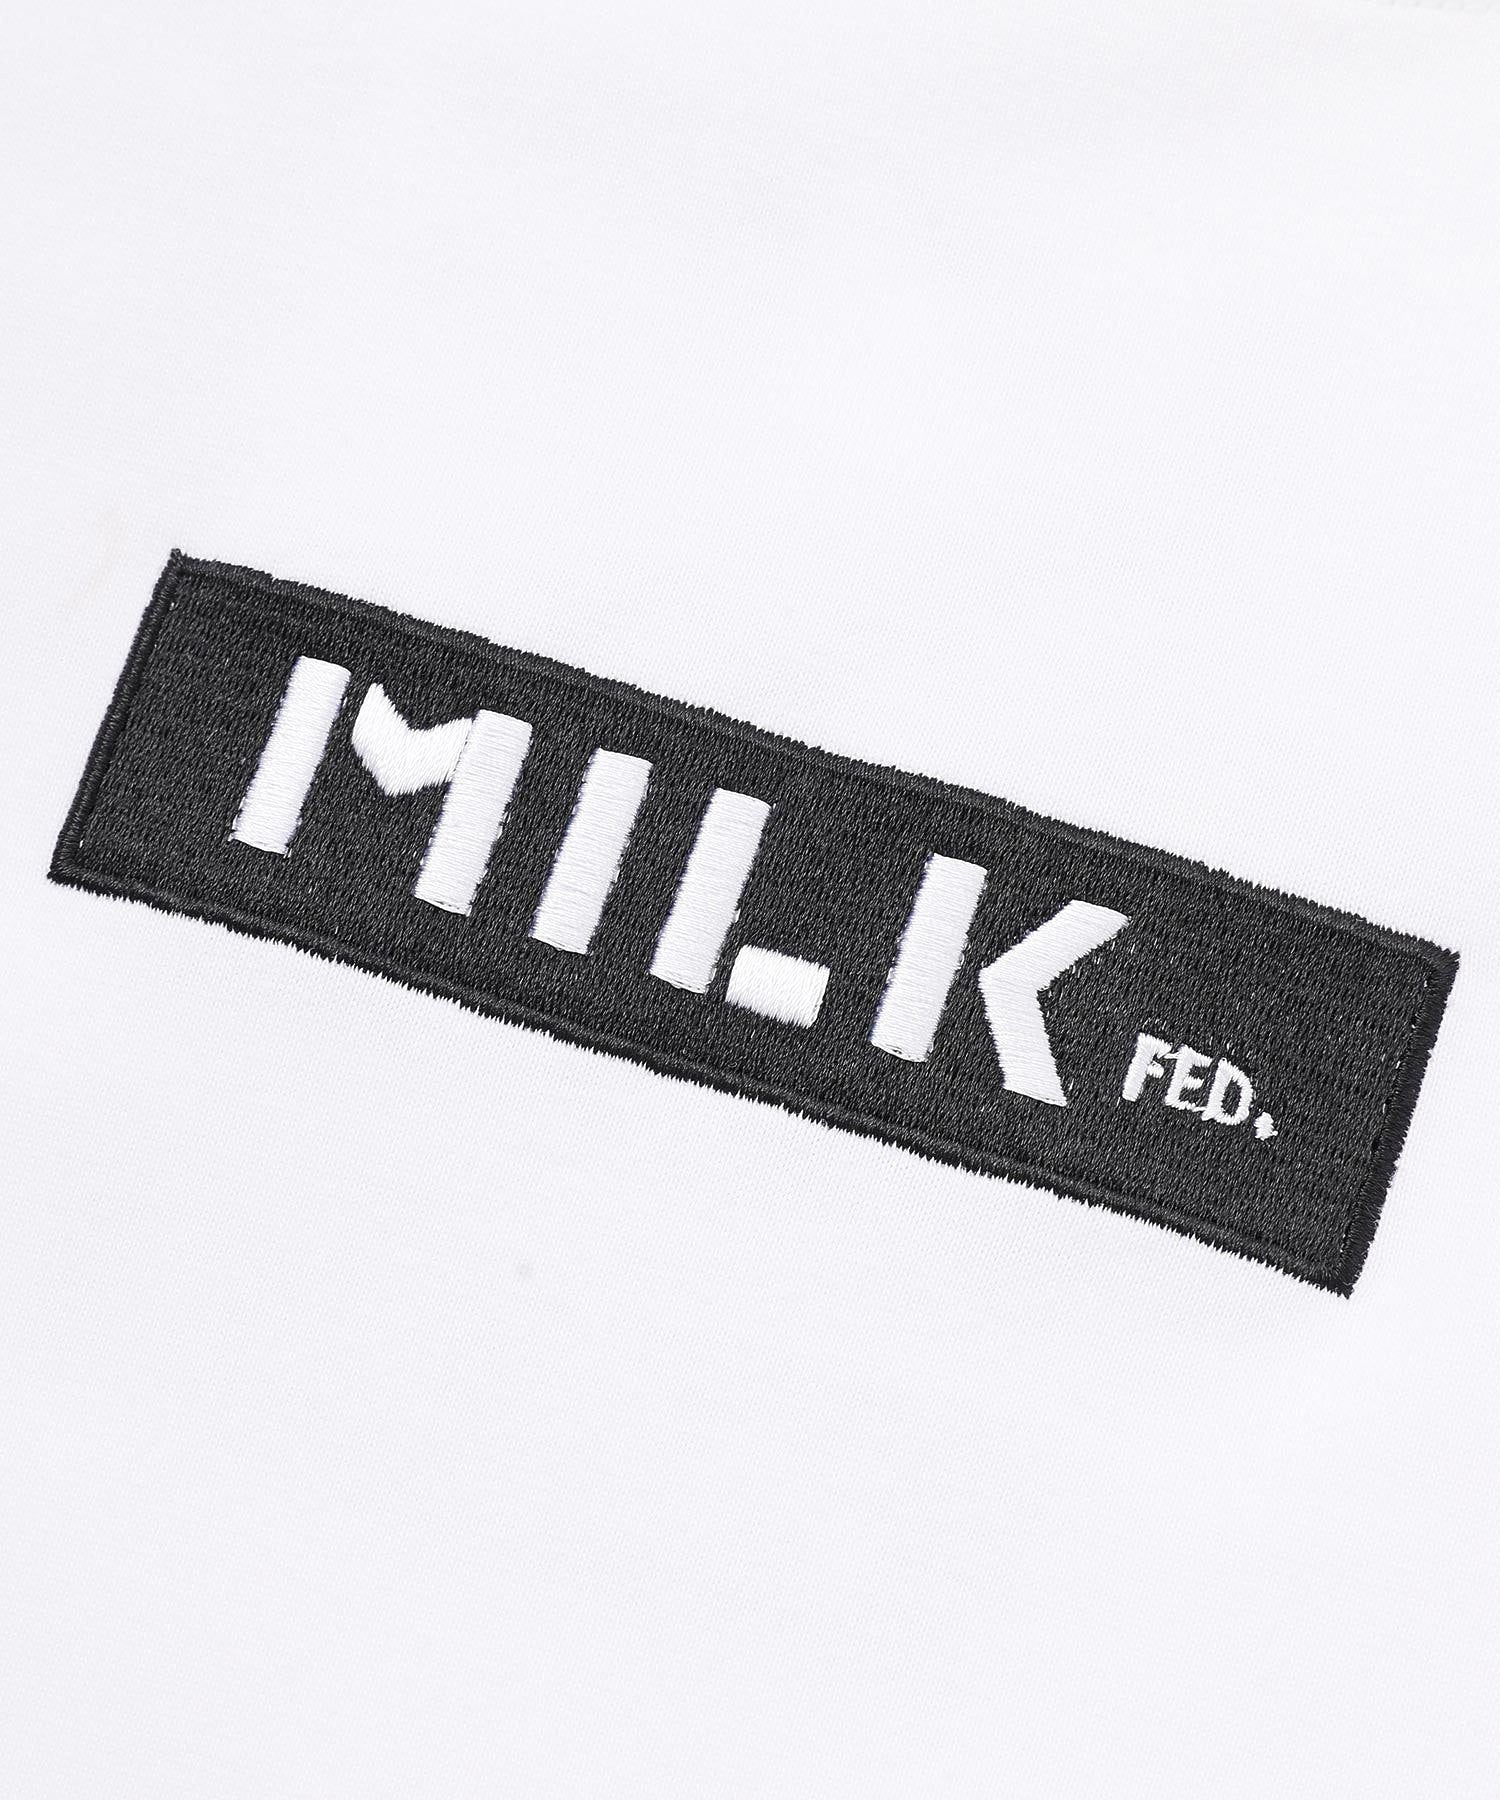 BAR AND STENCIL LOGO WIDE S/S TEE MILKFED.